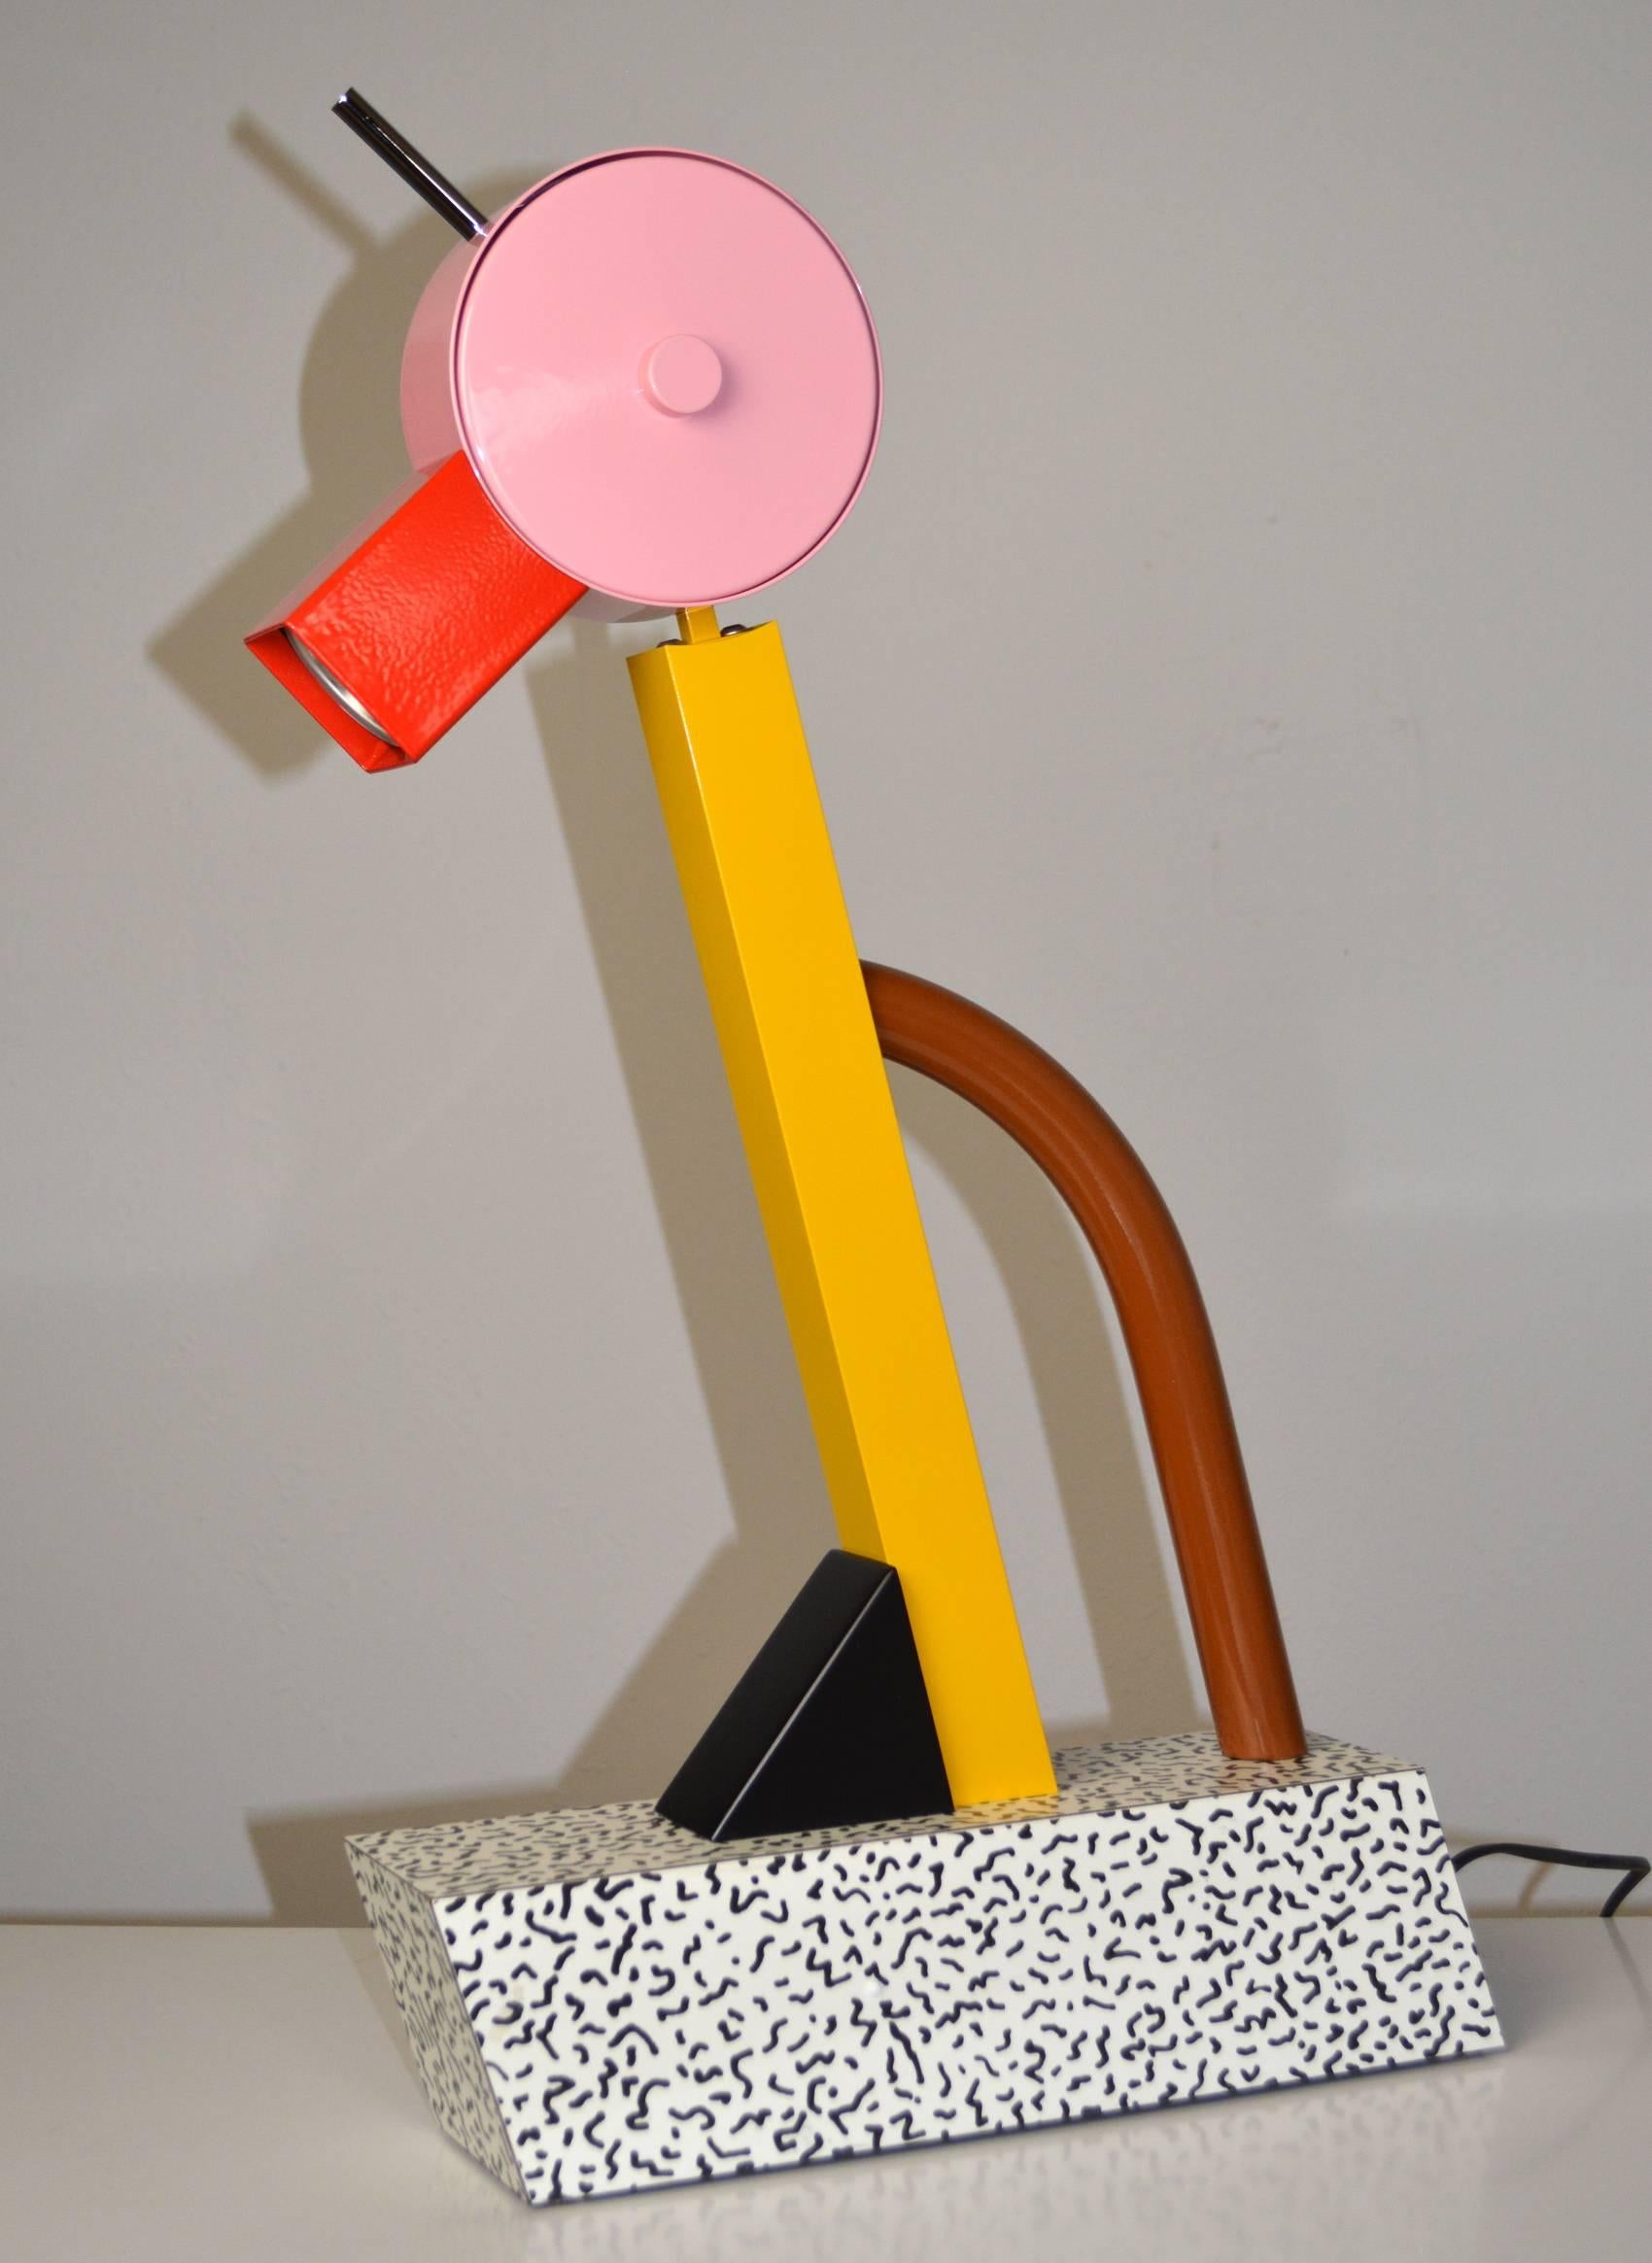 An iconic "Tahiti" lamp by Ettore Sottsass for Memphis. Capturing the spirit of the Memphis movement, the lamp is composed of metal, wood and laminate in the abstract form of a bird.
See Charlotte and Peter Fiell, "1000 Lights,